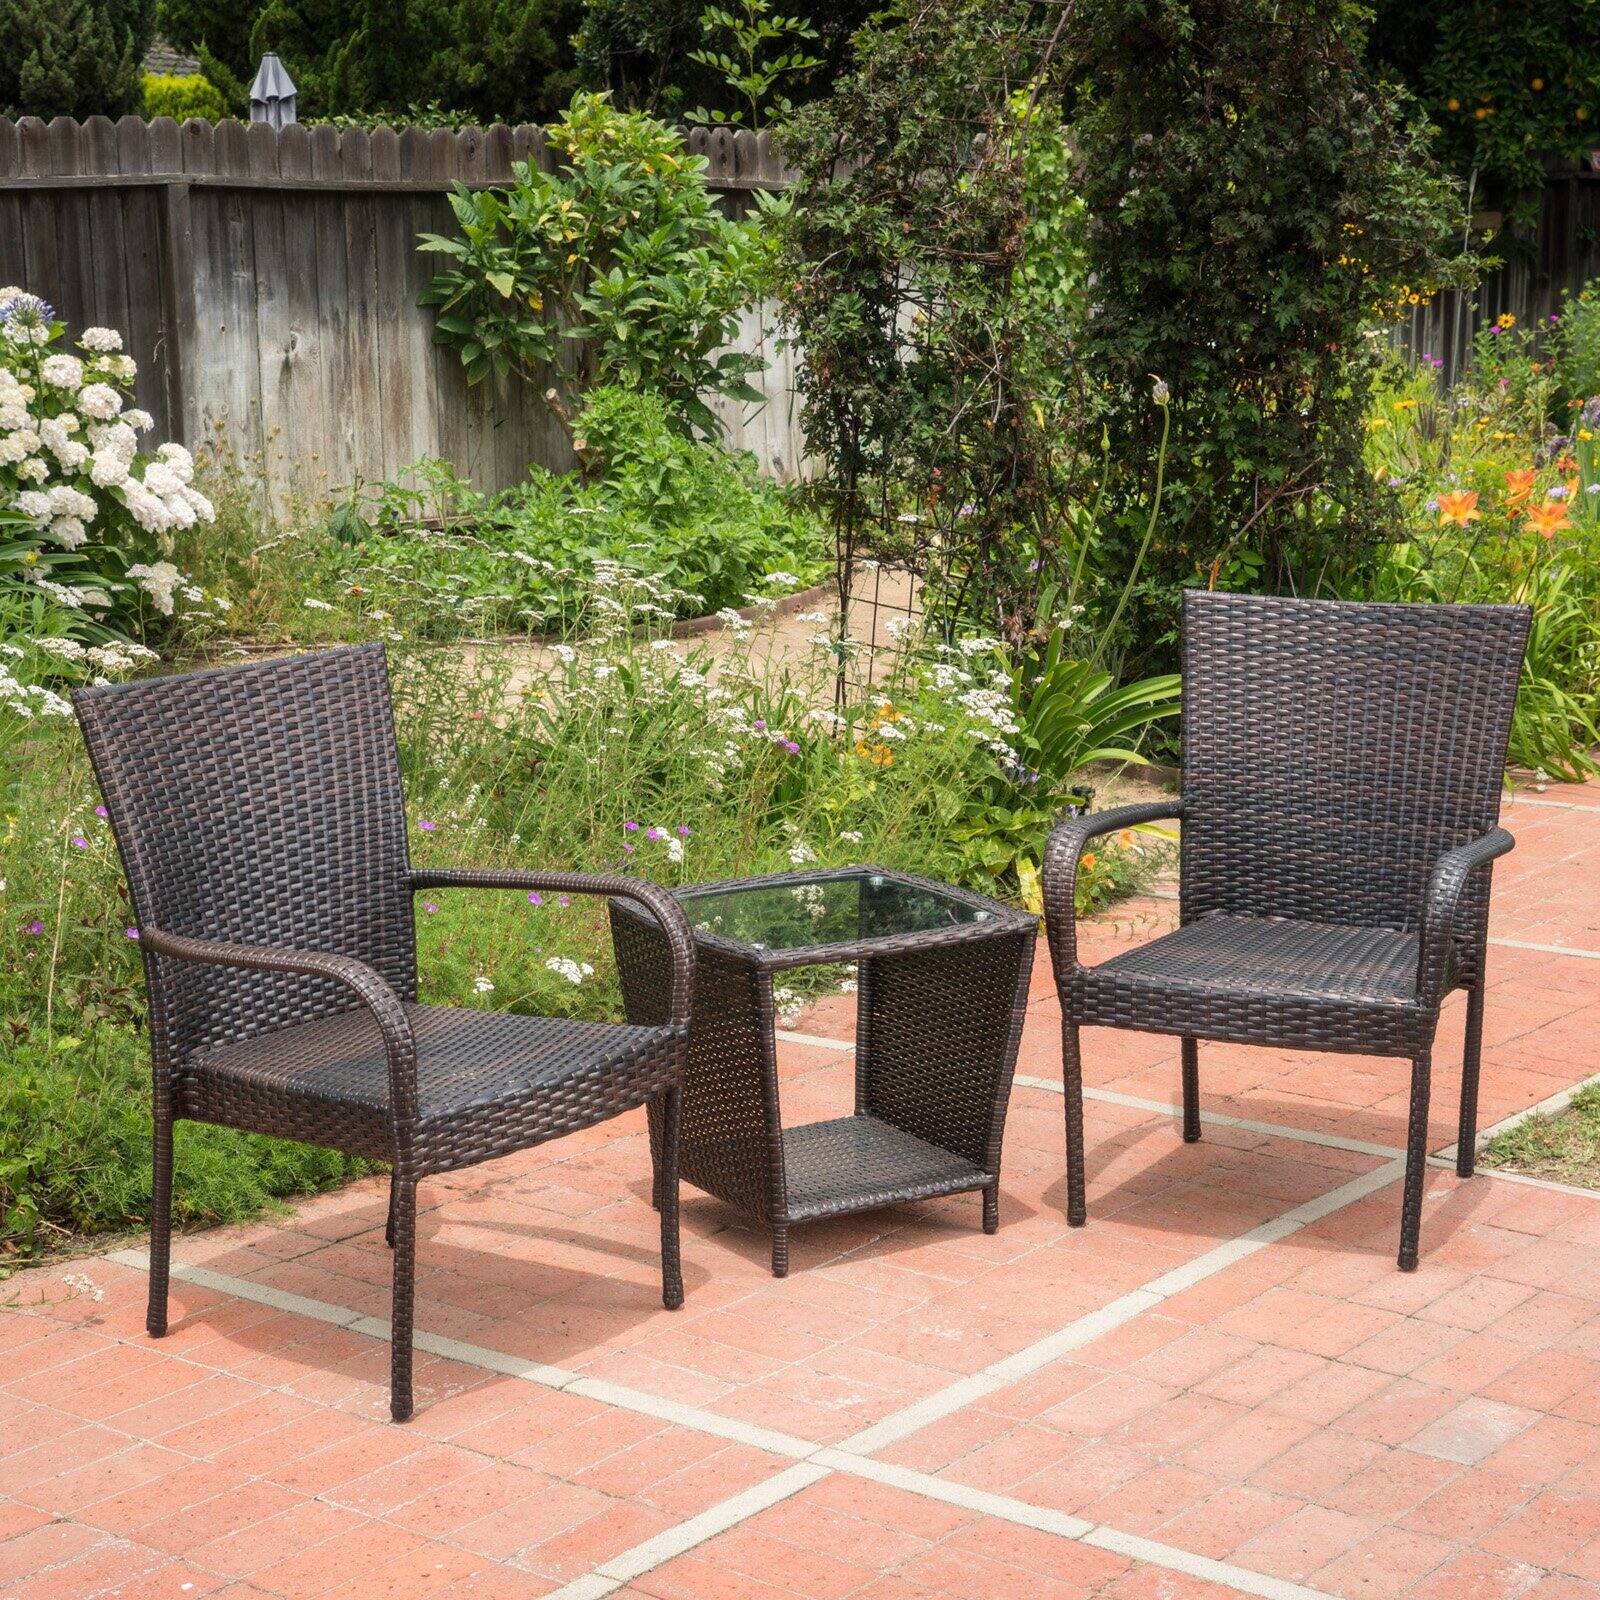 Aniela Outdoor Wicker and Glass 2 Seater Stacking Chair Chat Set - image 1 of 10